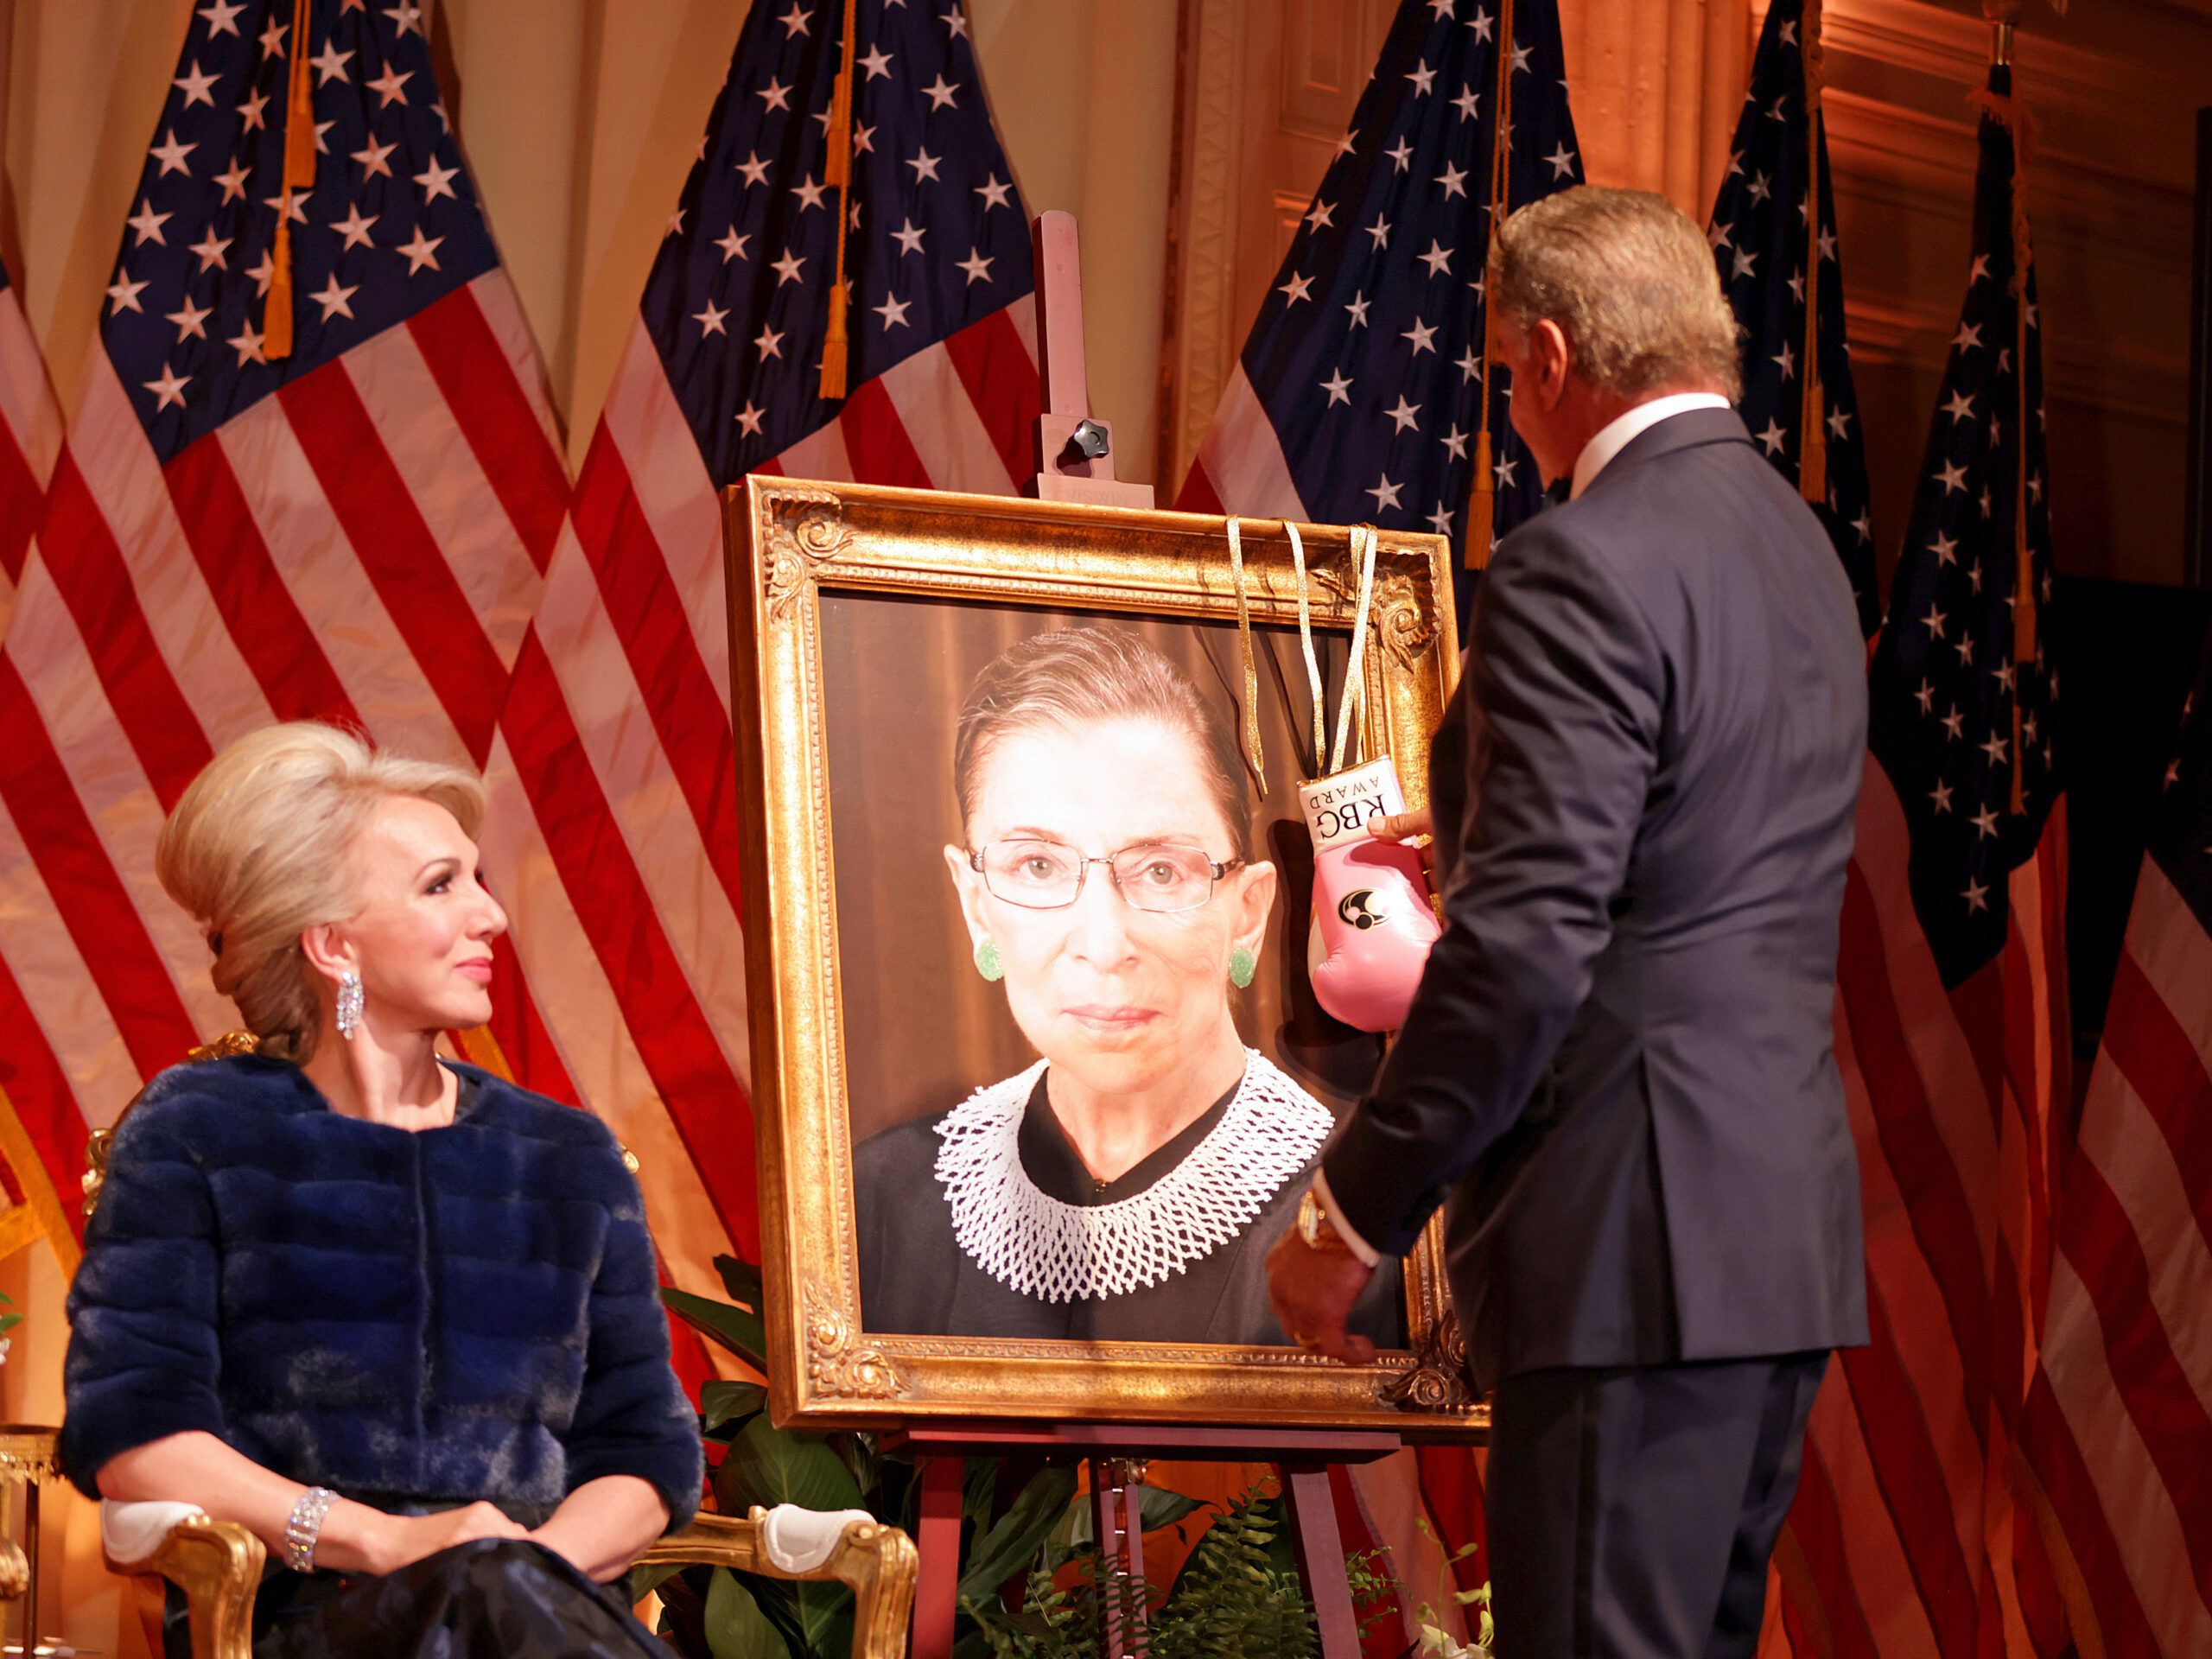 What is the foundation behind the Ruth Bader Ginsburg award controversy?